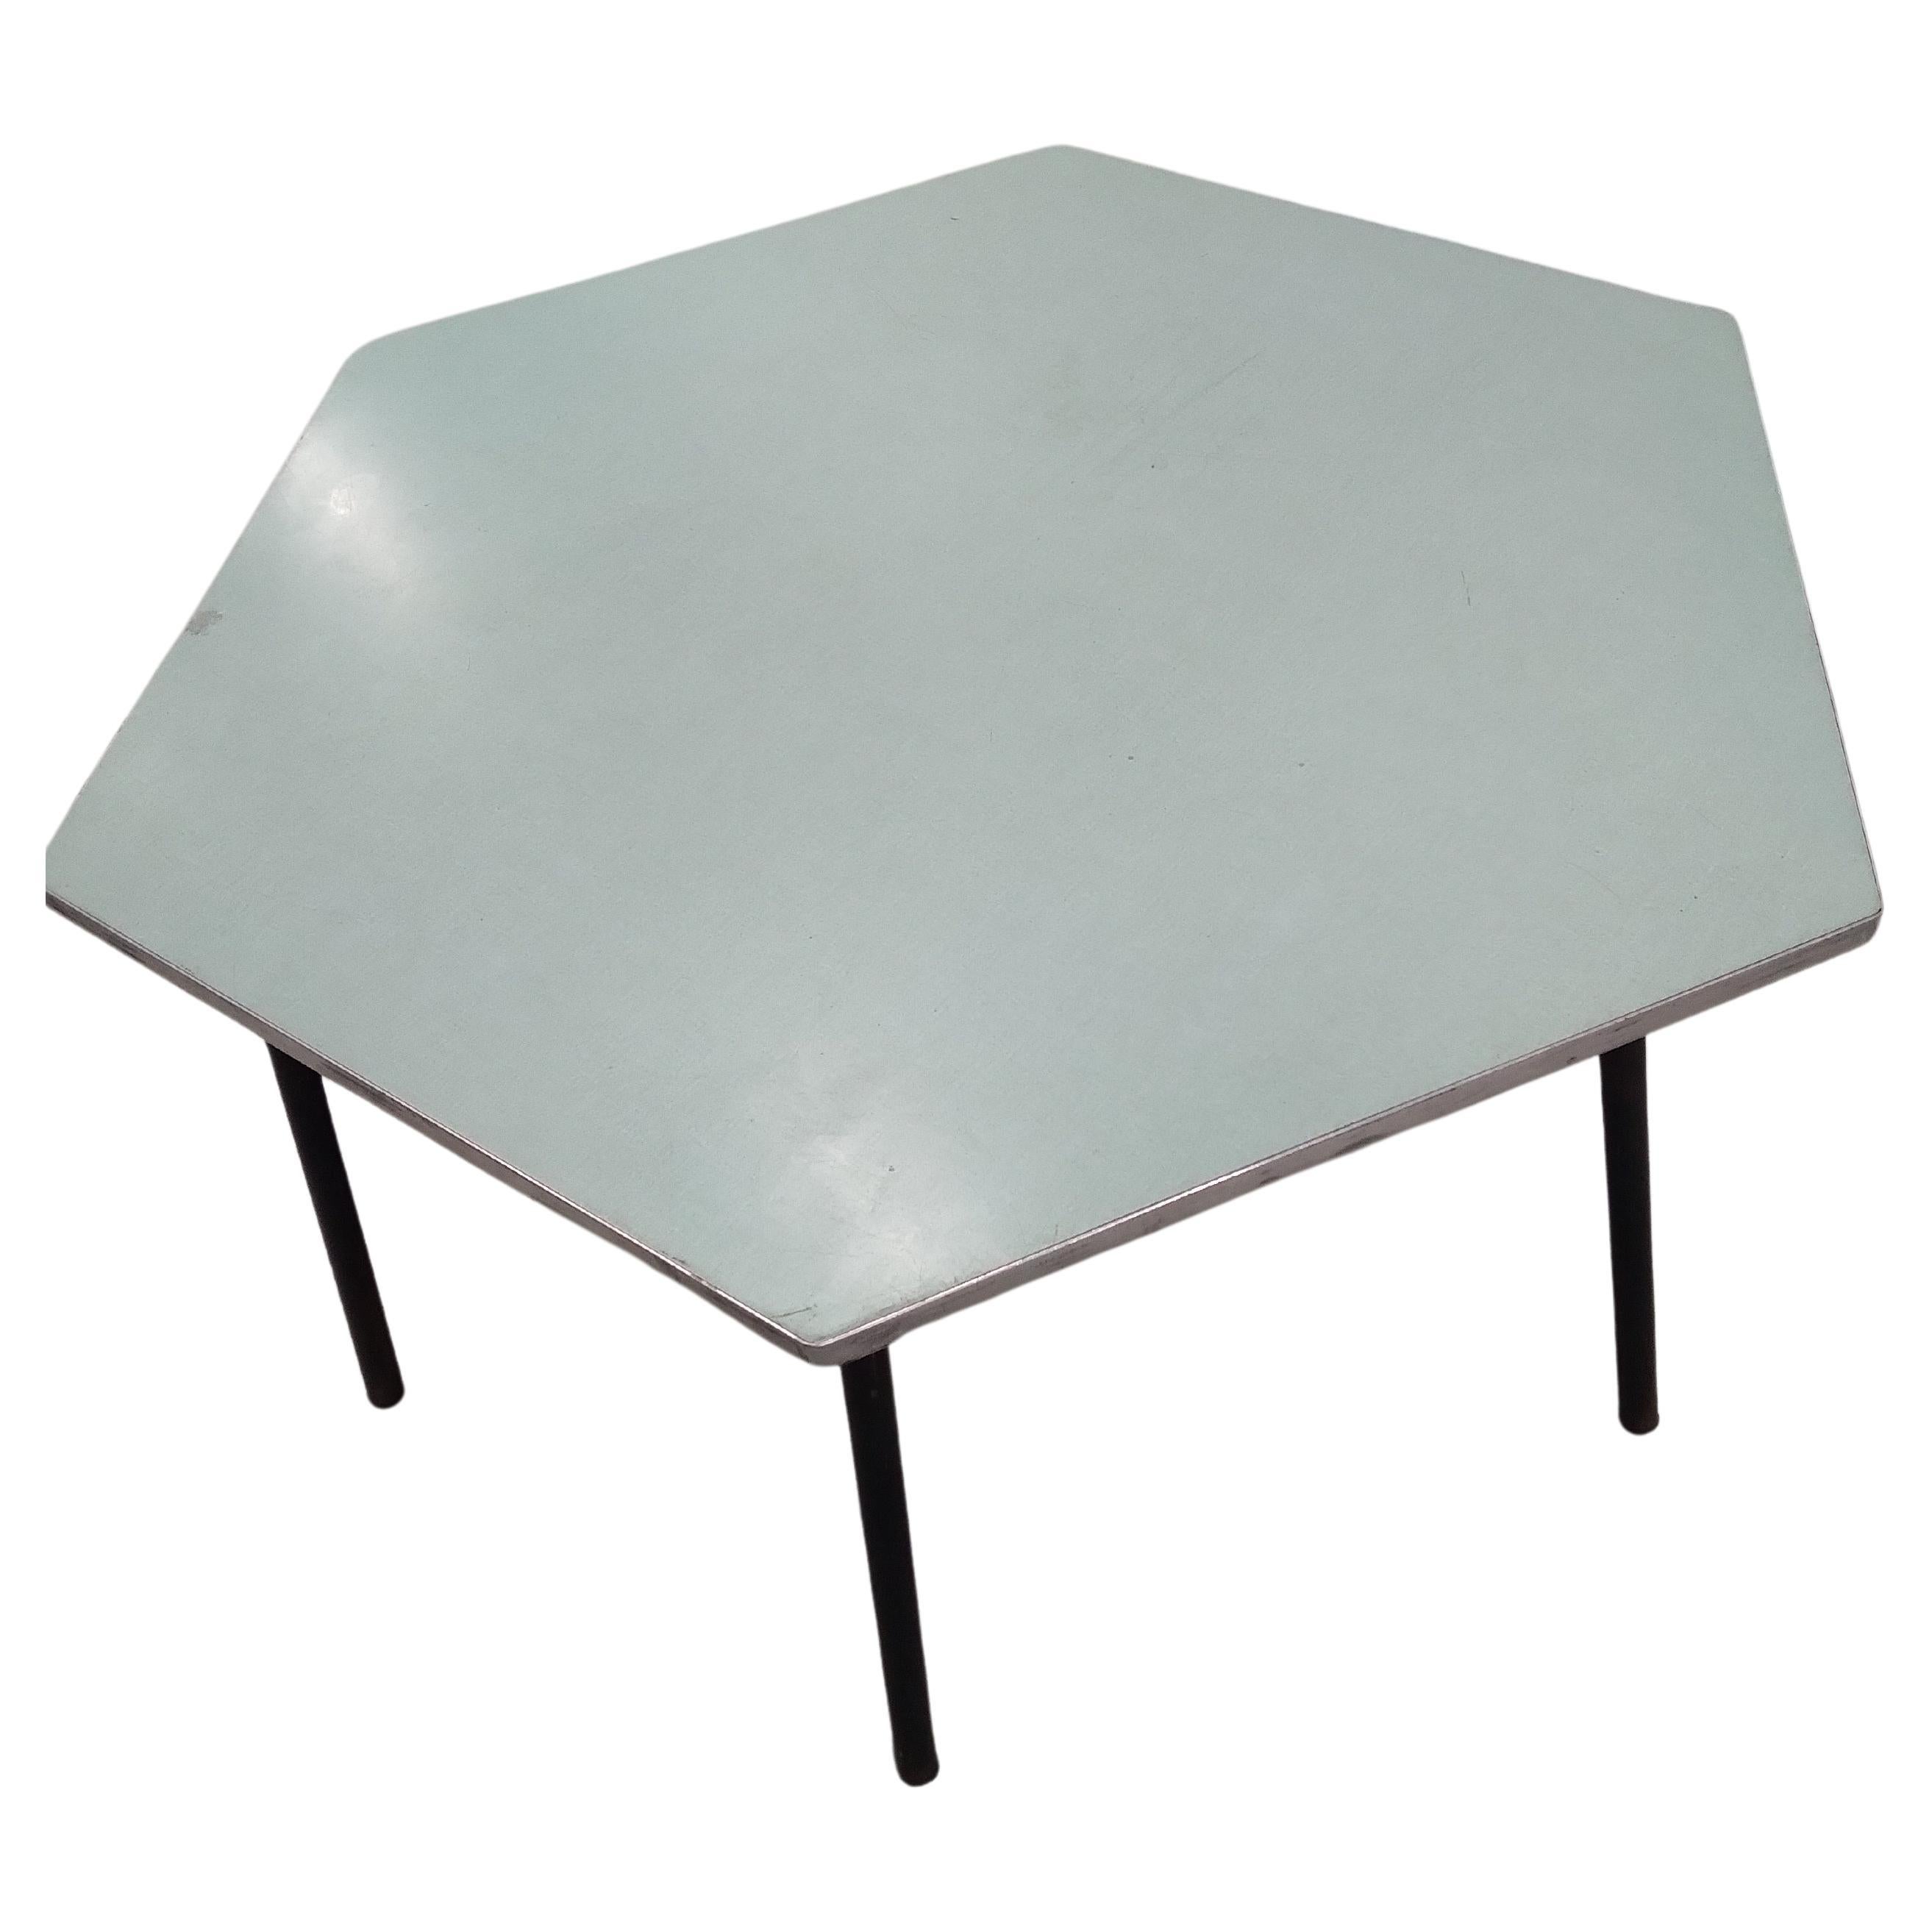 Set of 3 Low Tables of hexagonal shape. Coffee Table. 
Italian Work 1960 . Light green hexagonal formica top with metal legs .
